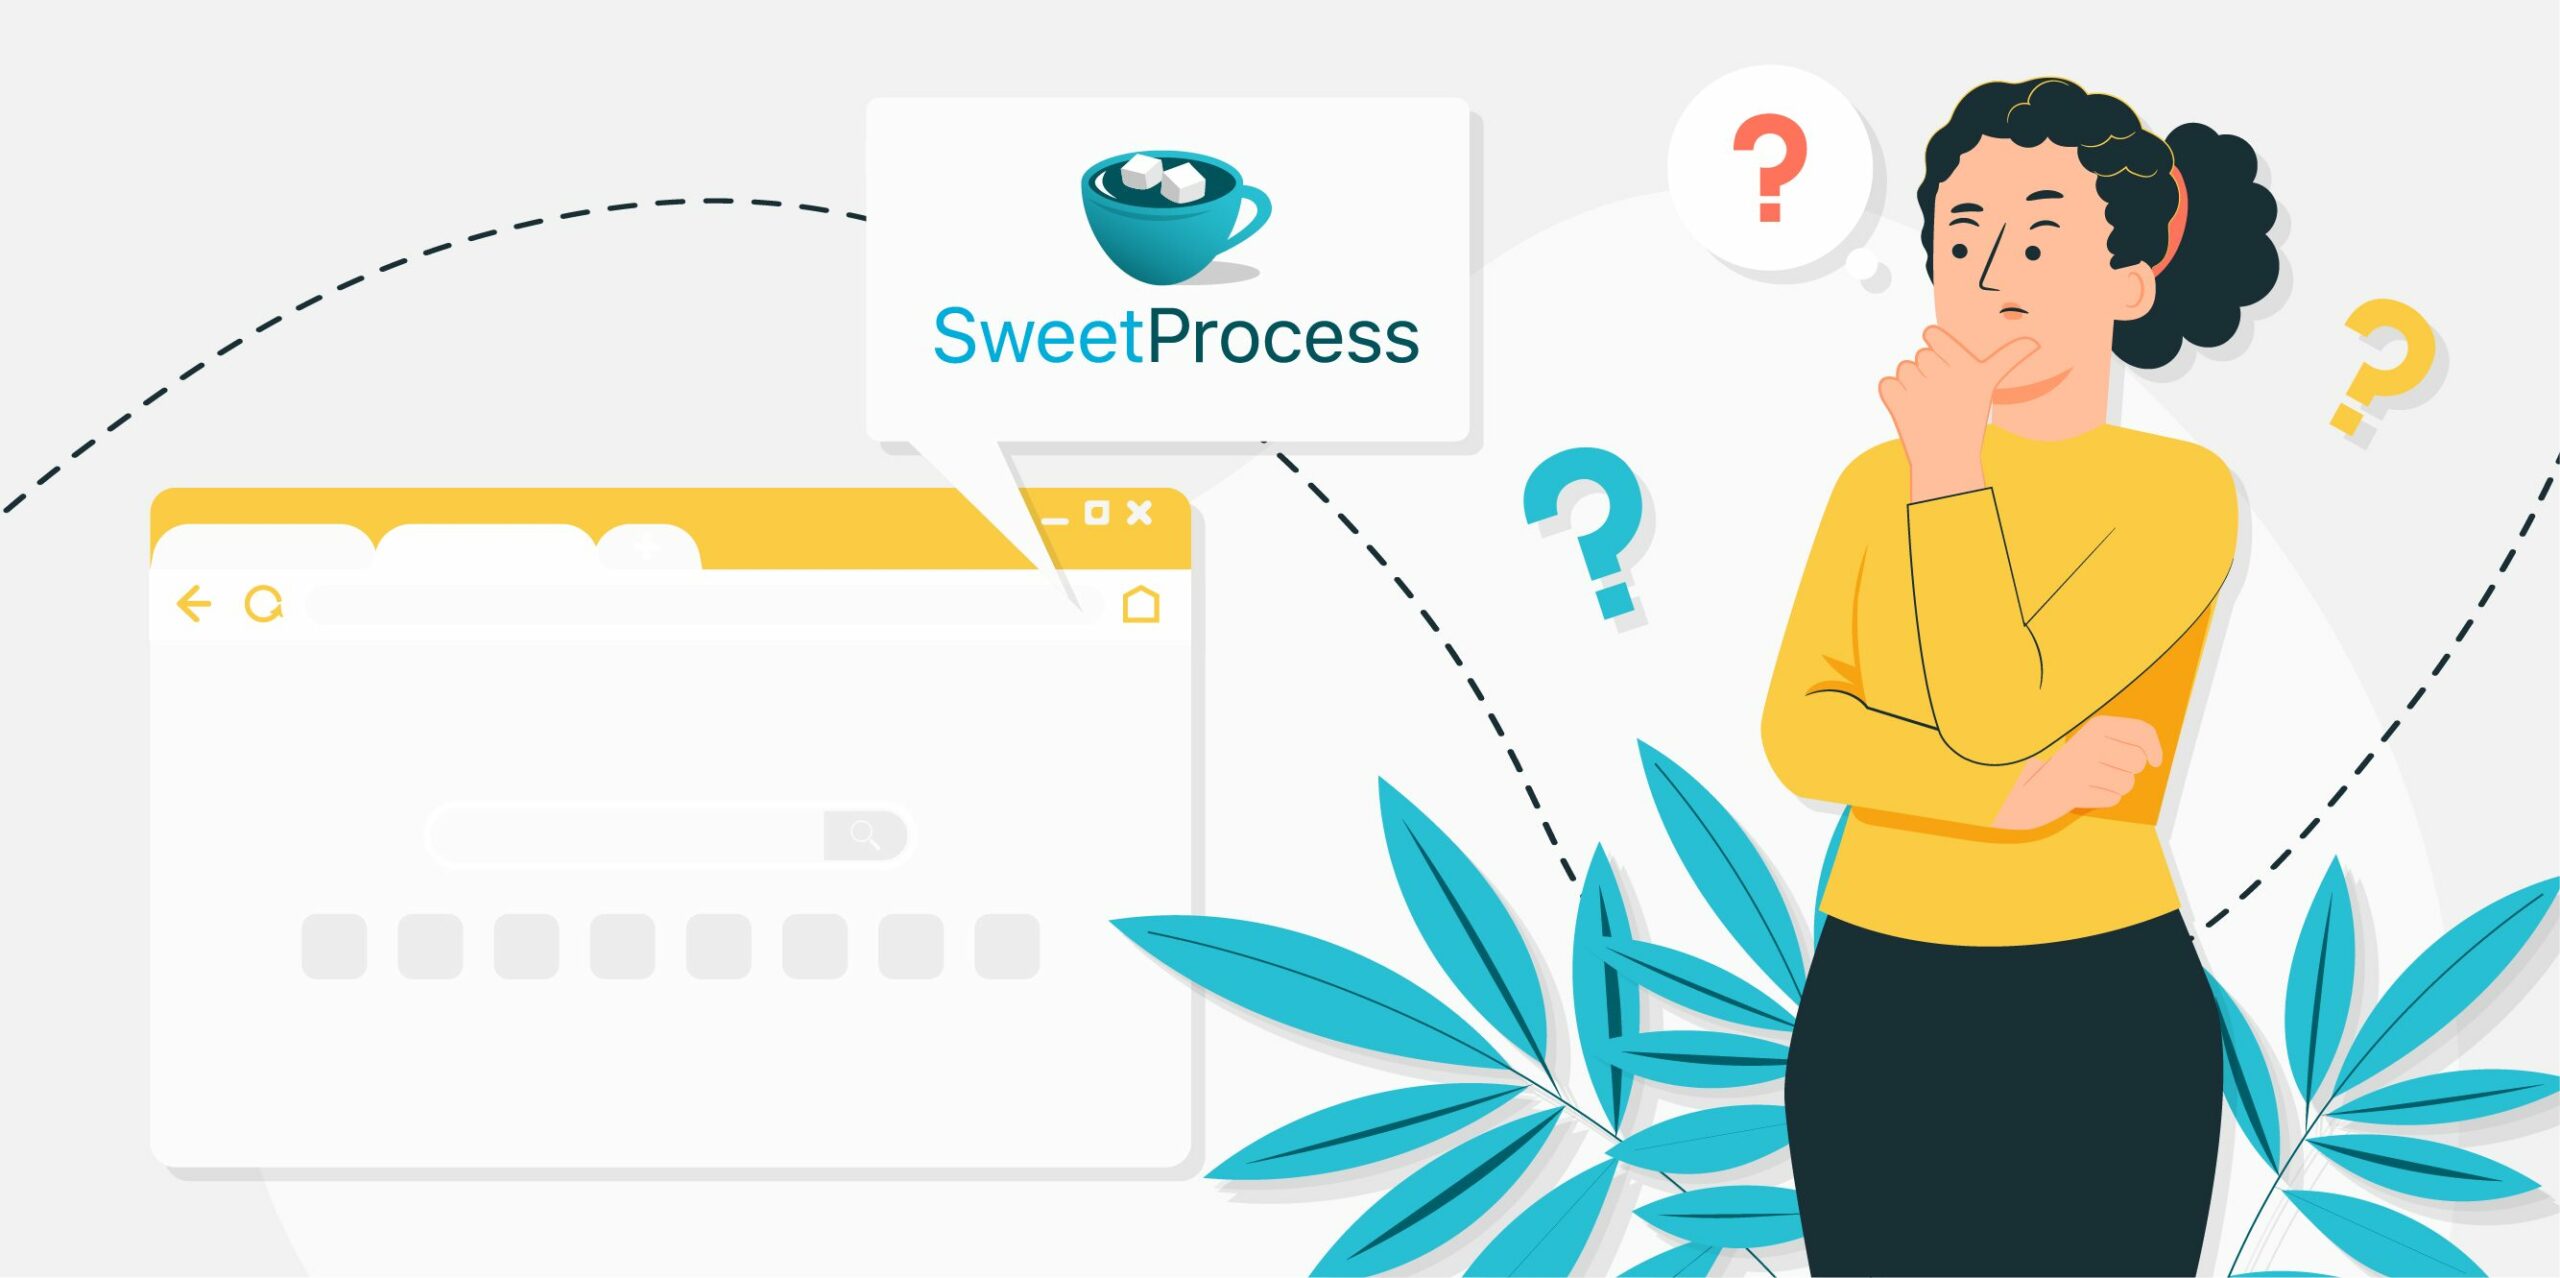 How to Use the SweetProcess Chrome Extension